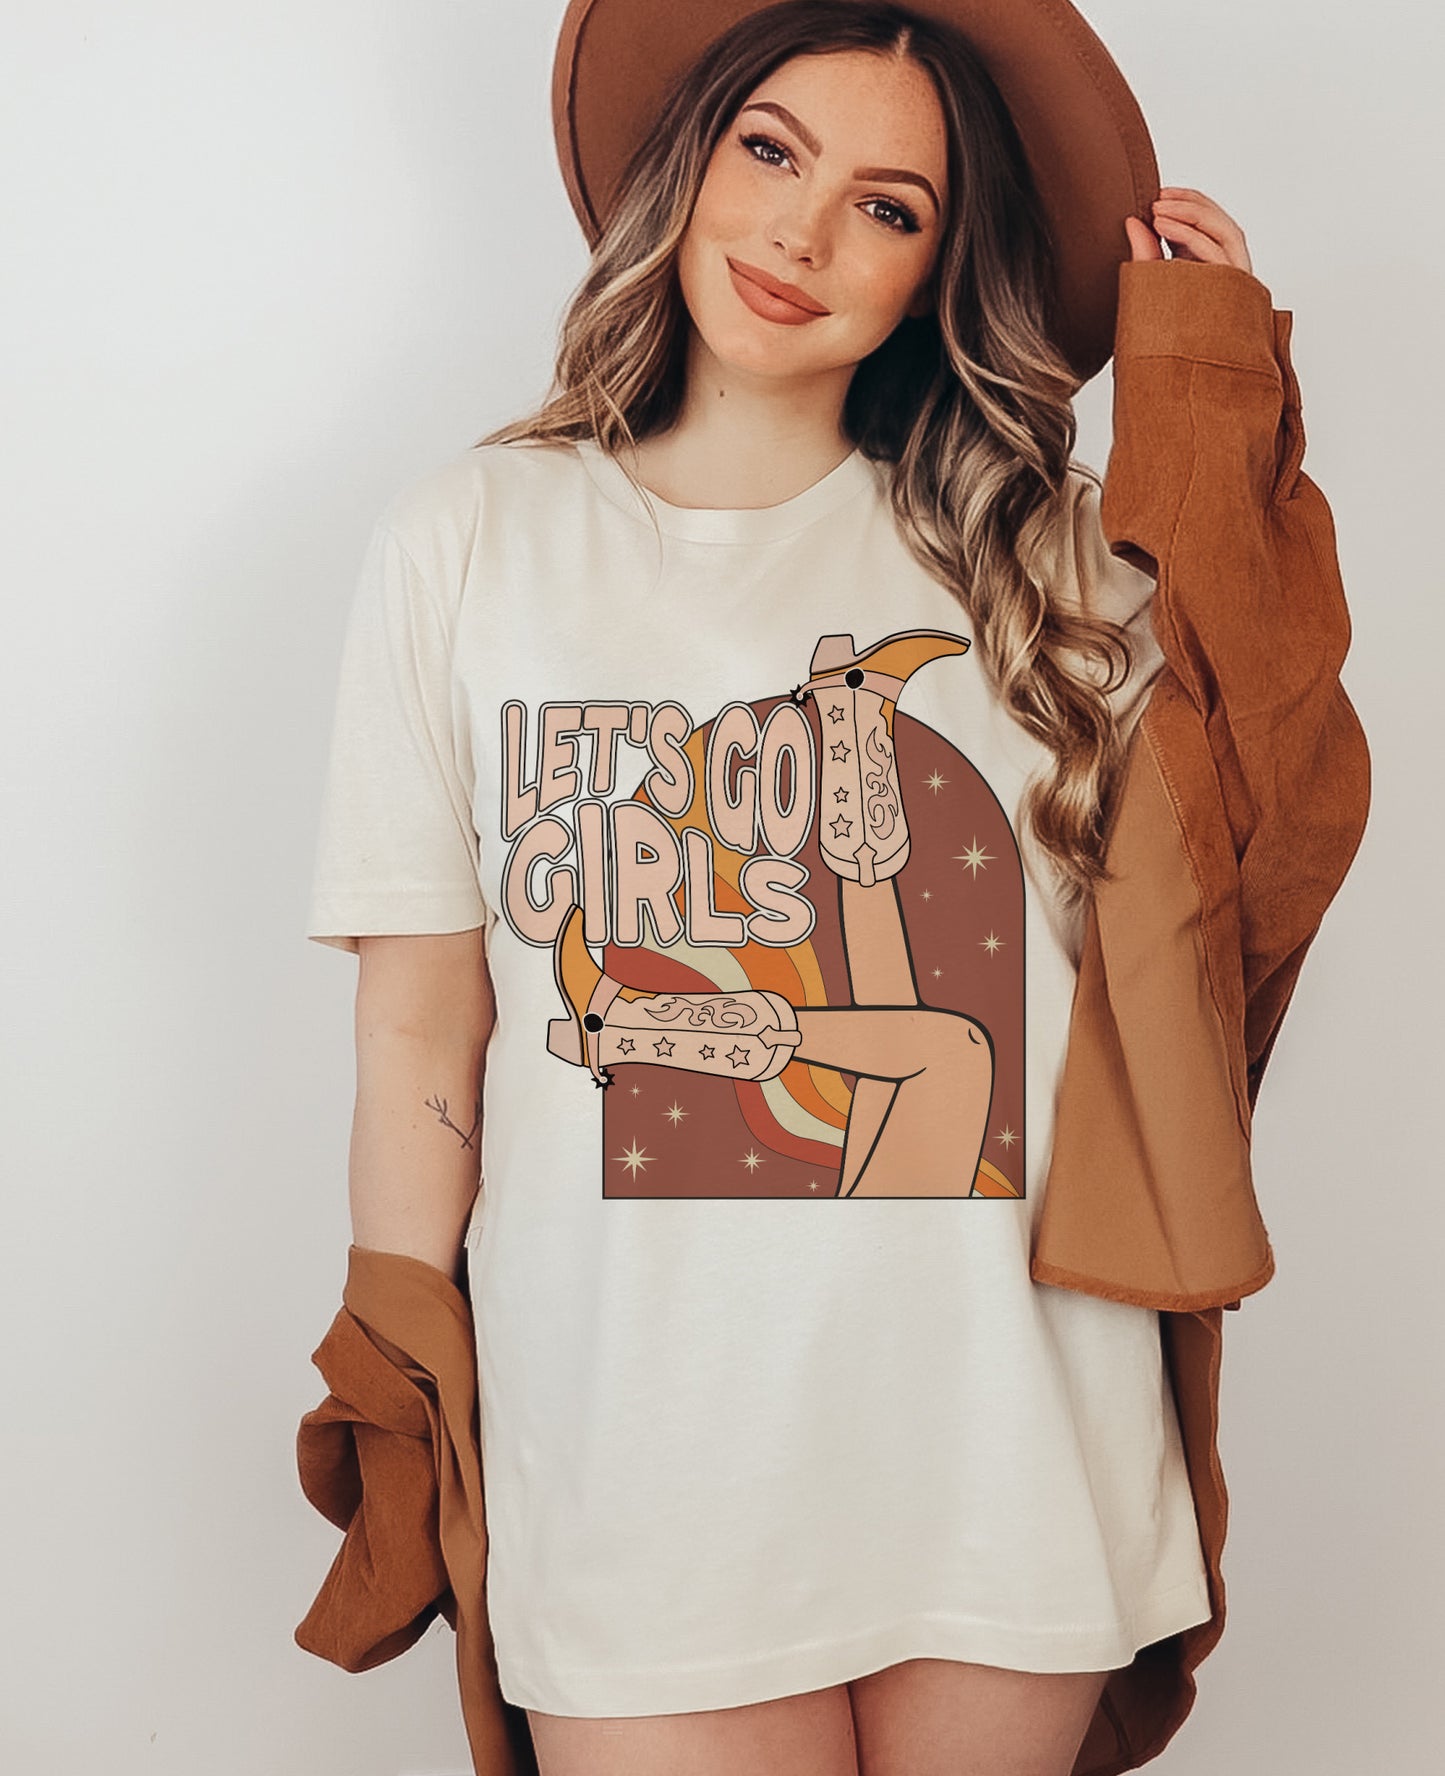 Comfort Colors or Bella Let's Go Girls Country Music Comfort Colors Shirt/ Youth And Adult Sizes Available